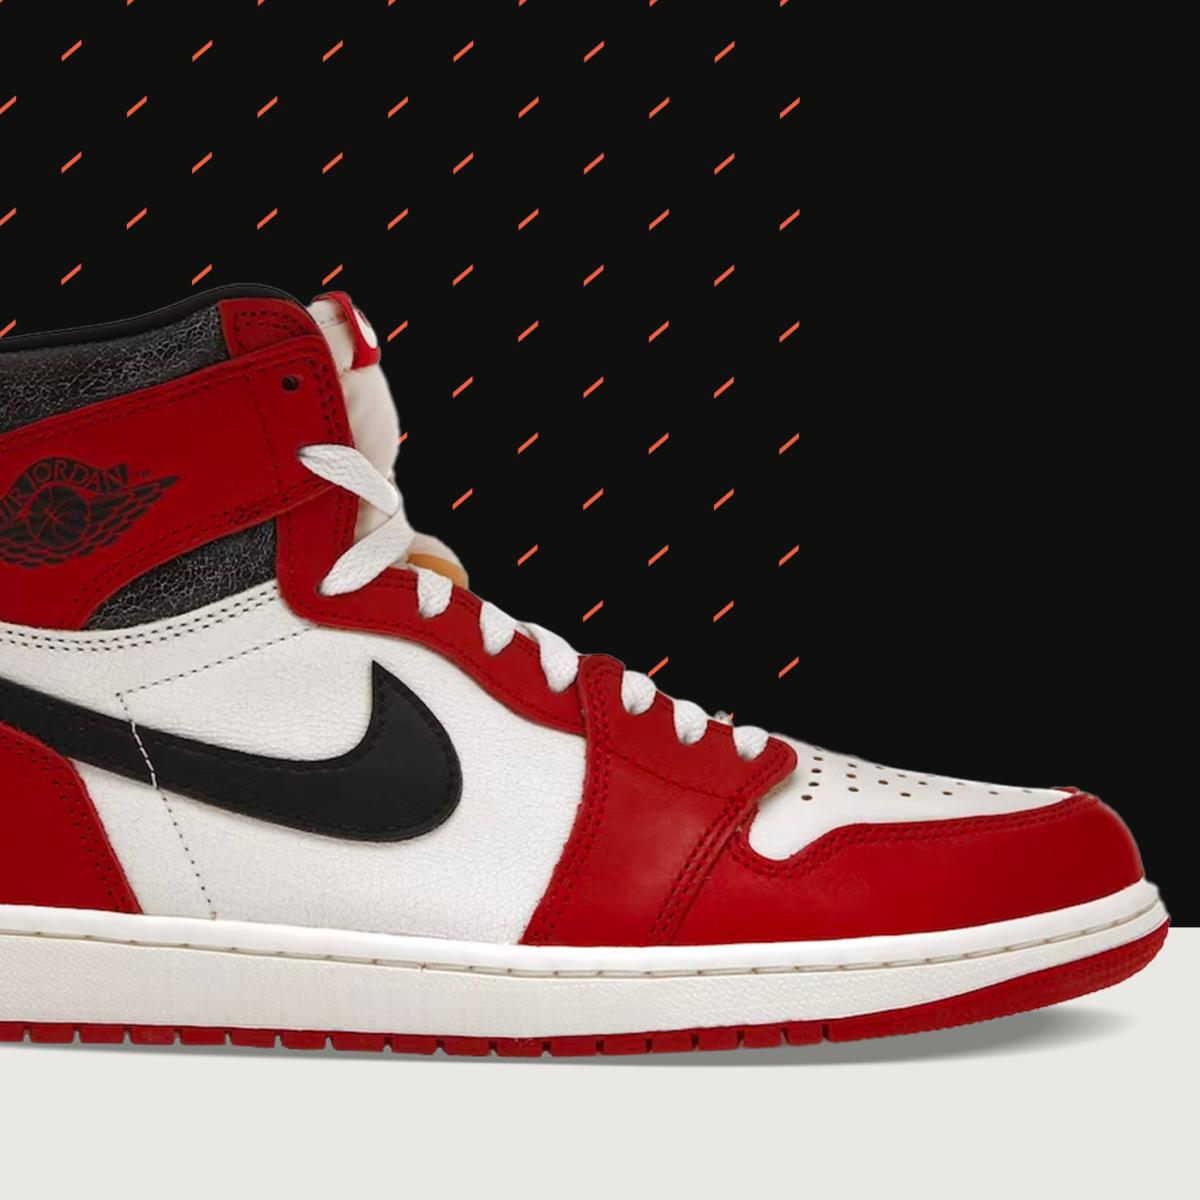 Get a Pair of Off-White x Jordan 1s for Retail! [UPDATED] - StockX News